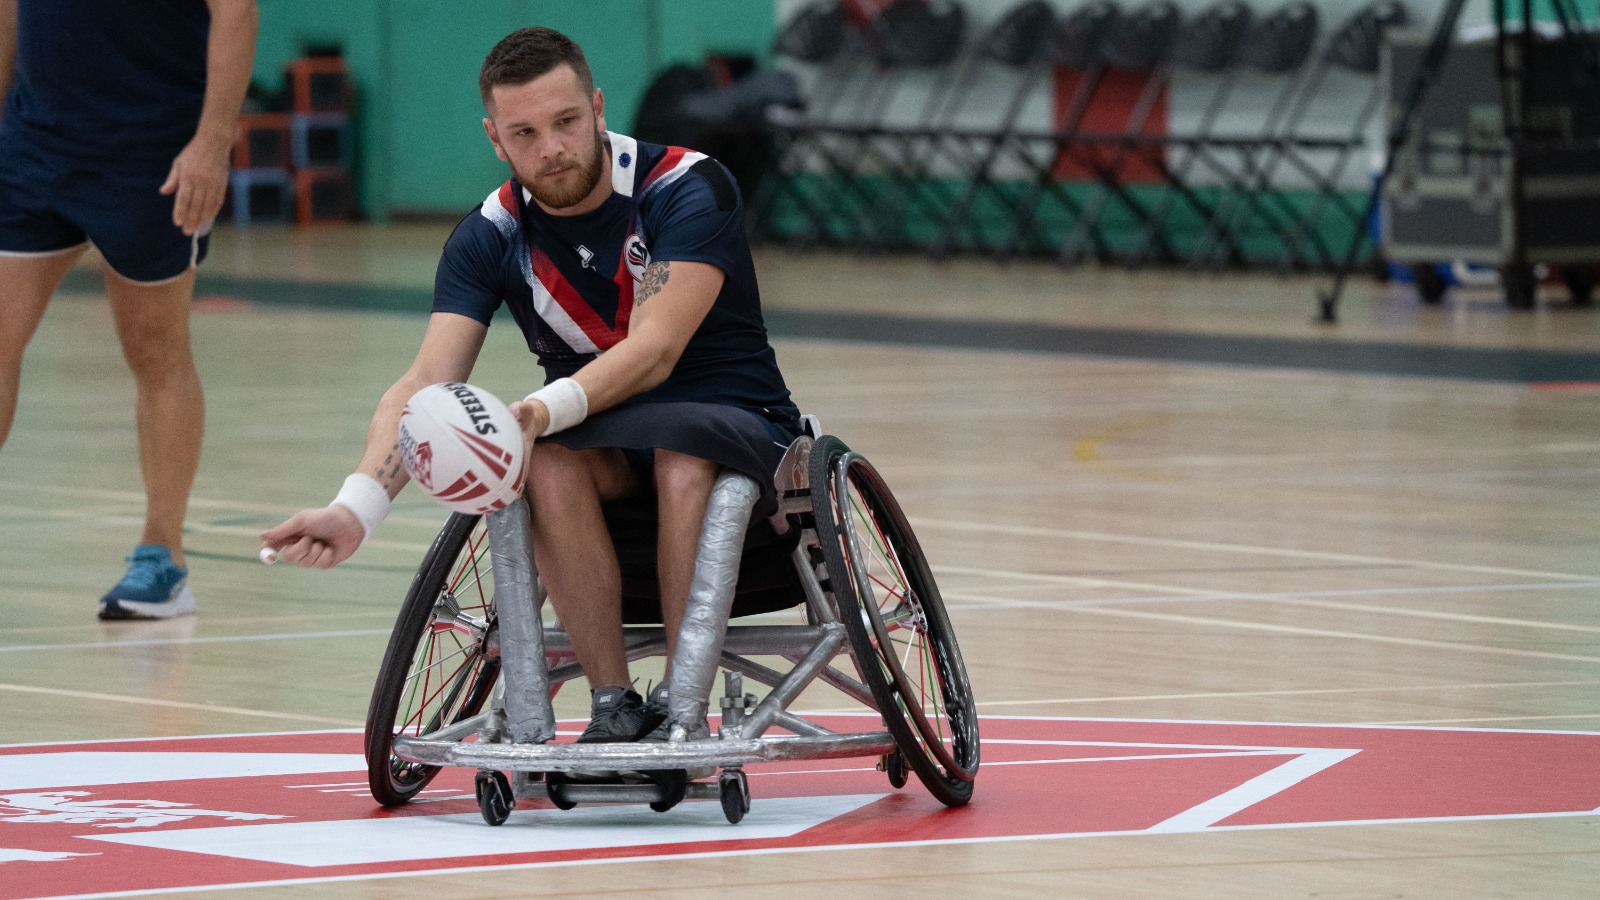 Picture by Will Palmer/SWpix.com – 10/11/2021 – Rugby League – Wheelchair International – England v France – Medway Park Sports Centre, Gillingham, England – Gilles Clausells (C) of France warms up before the match